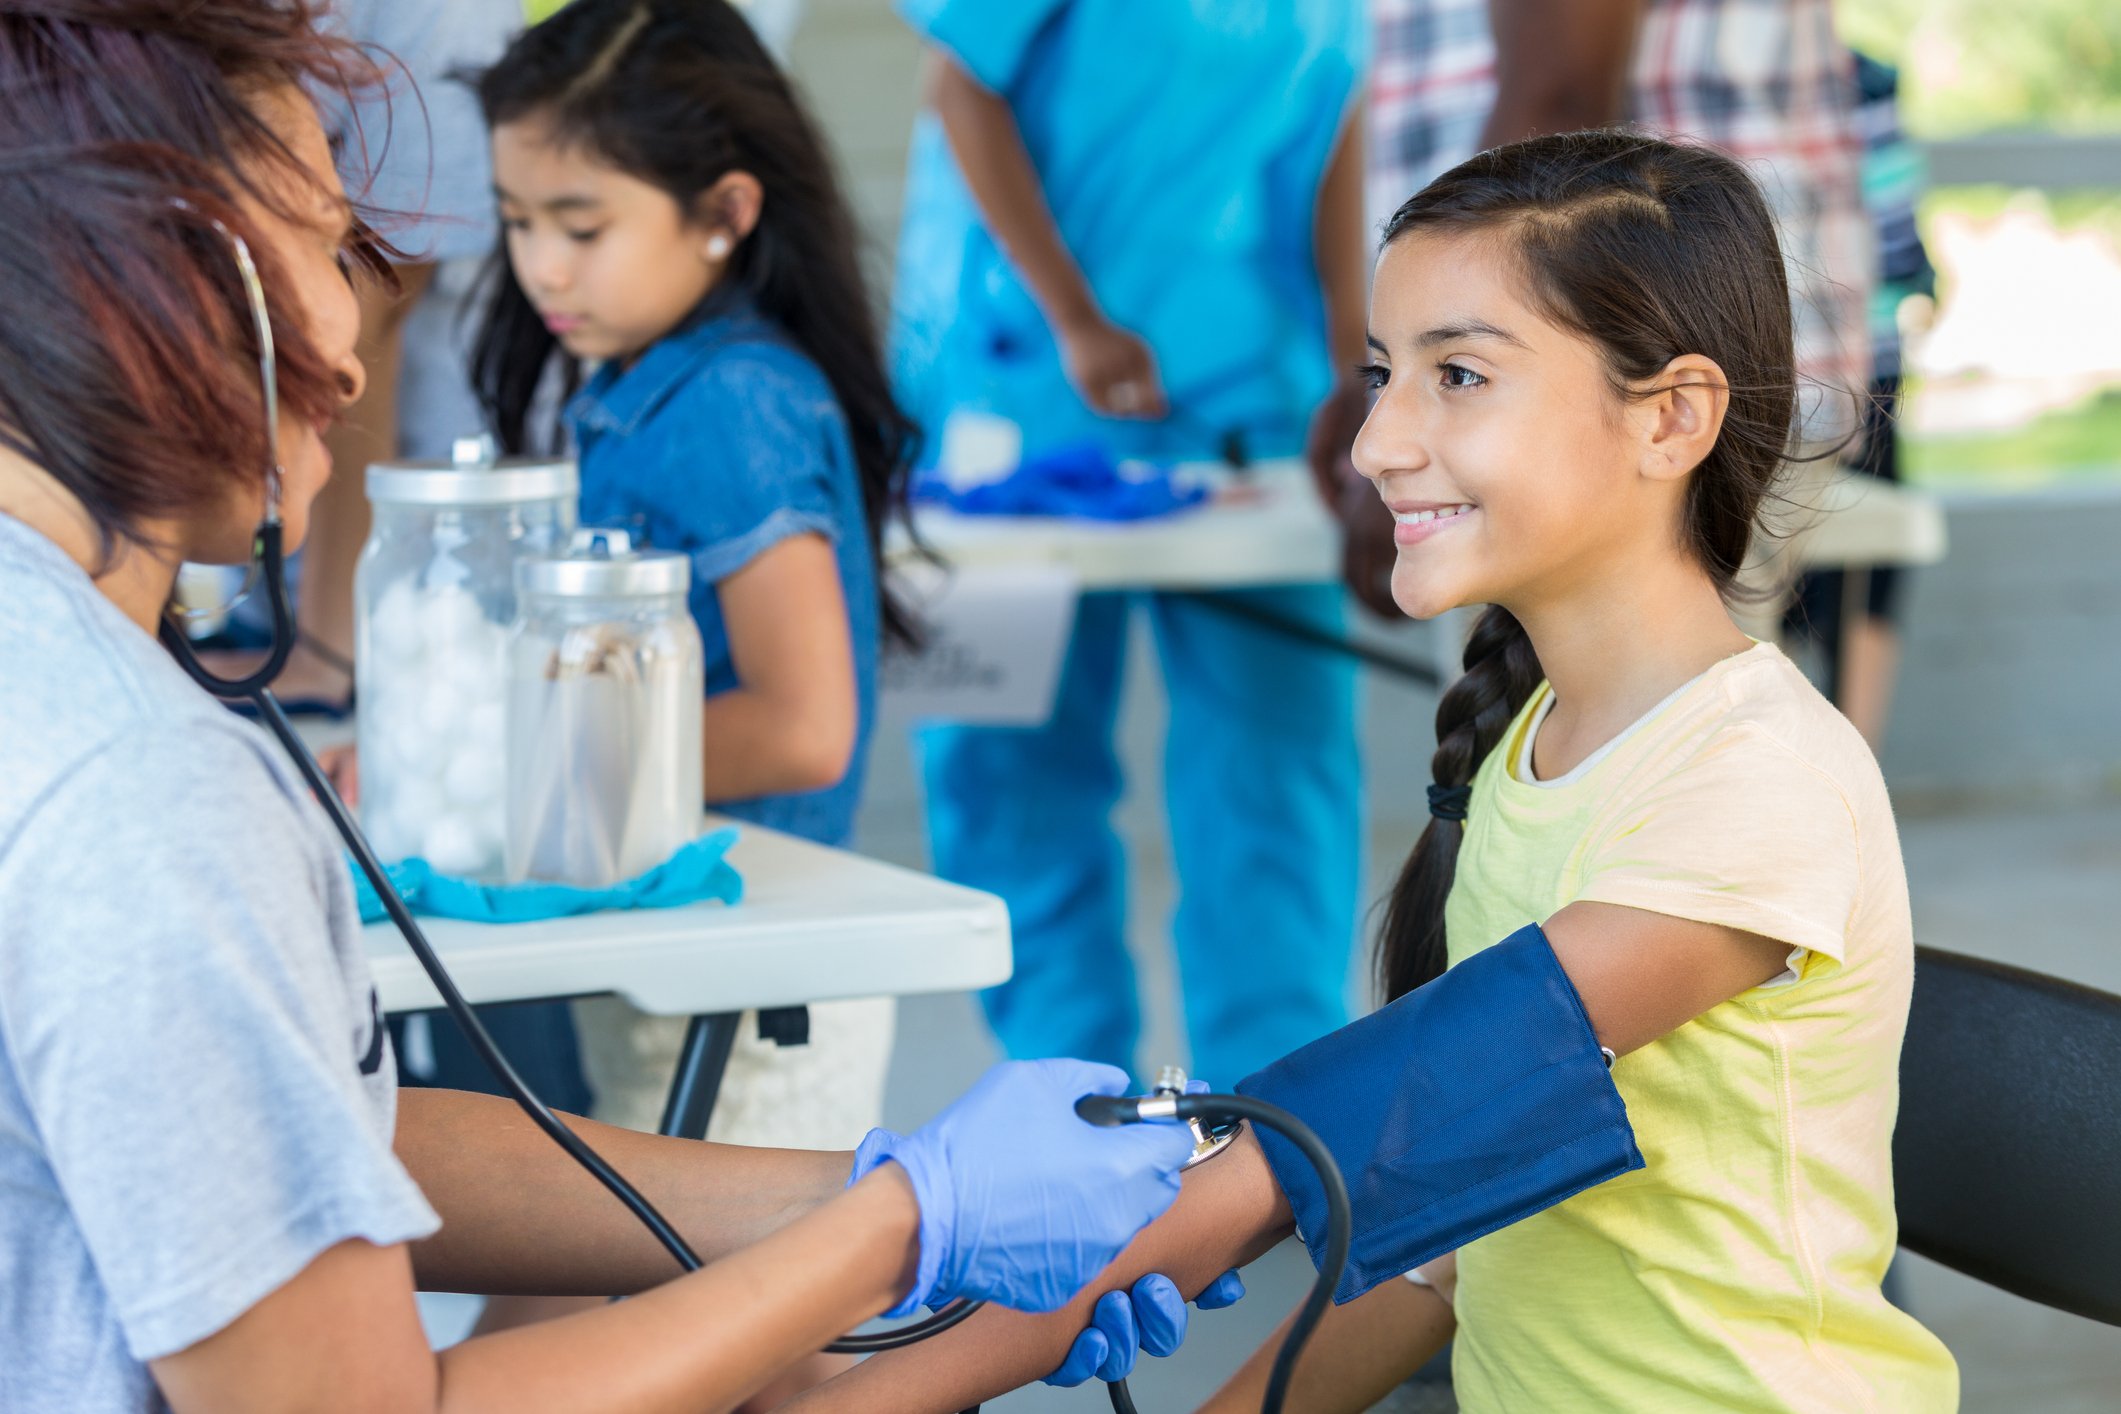 Young Hispanic patient getting blood pressure checked by nurse - stock photo